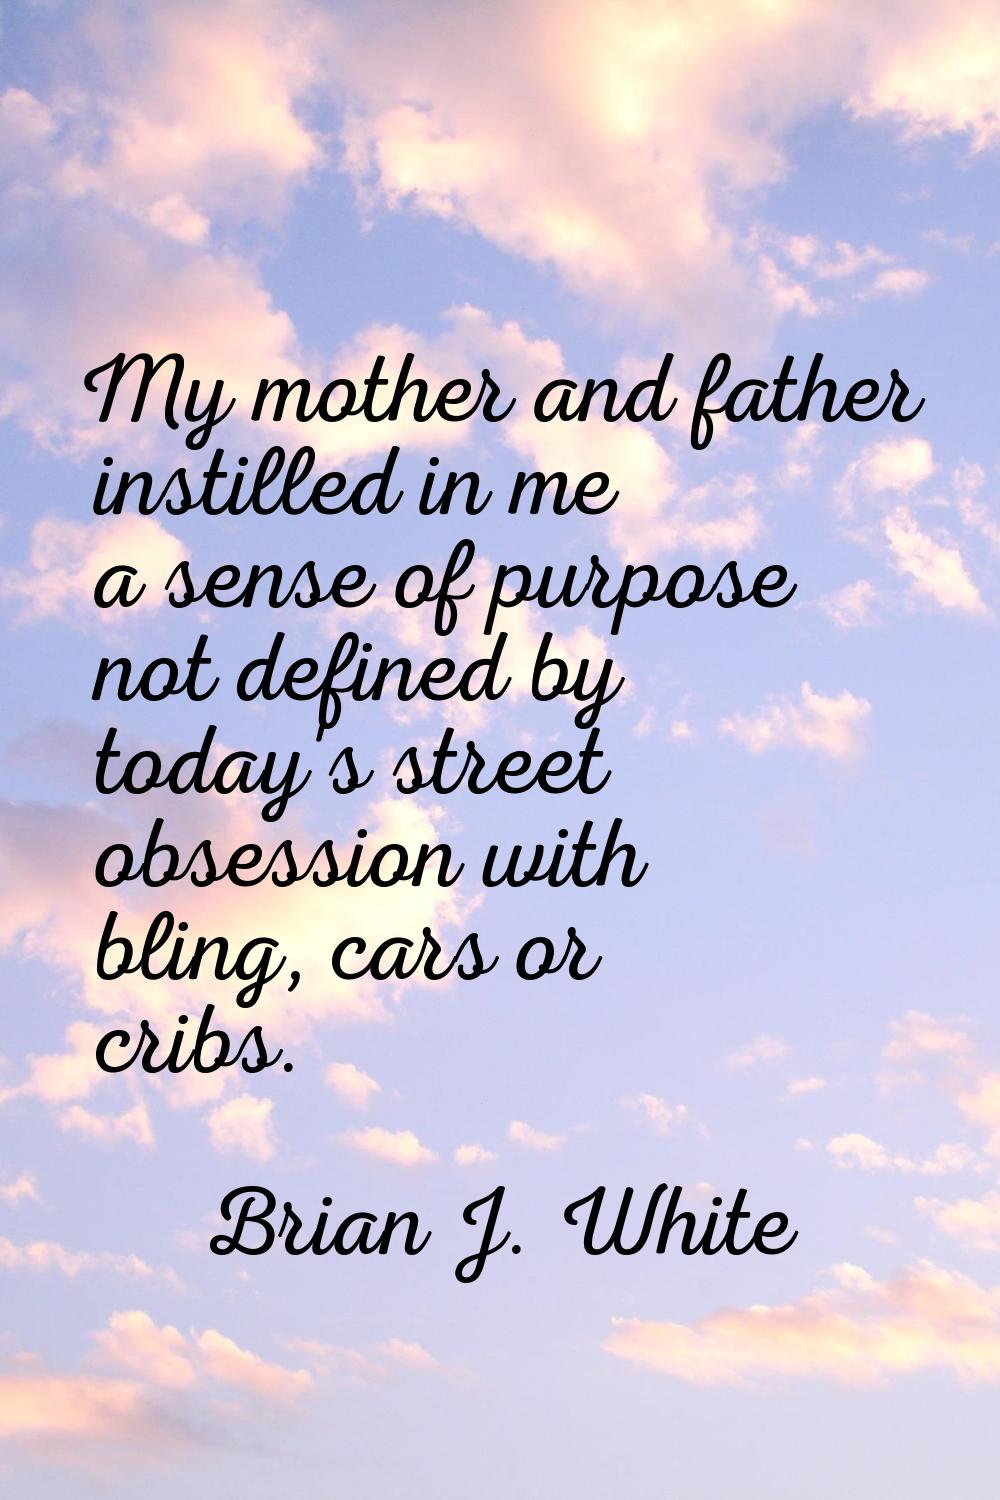 My mother and father instilled in me a sense of purpose not defined by today's street obsession wit